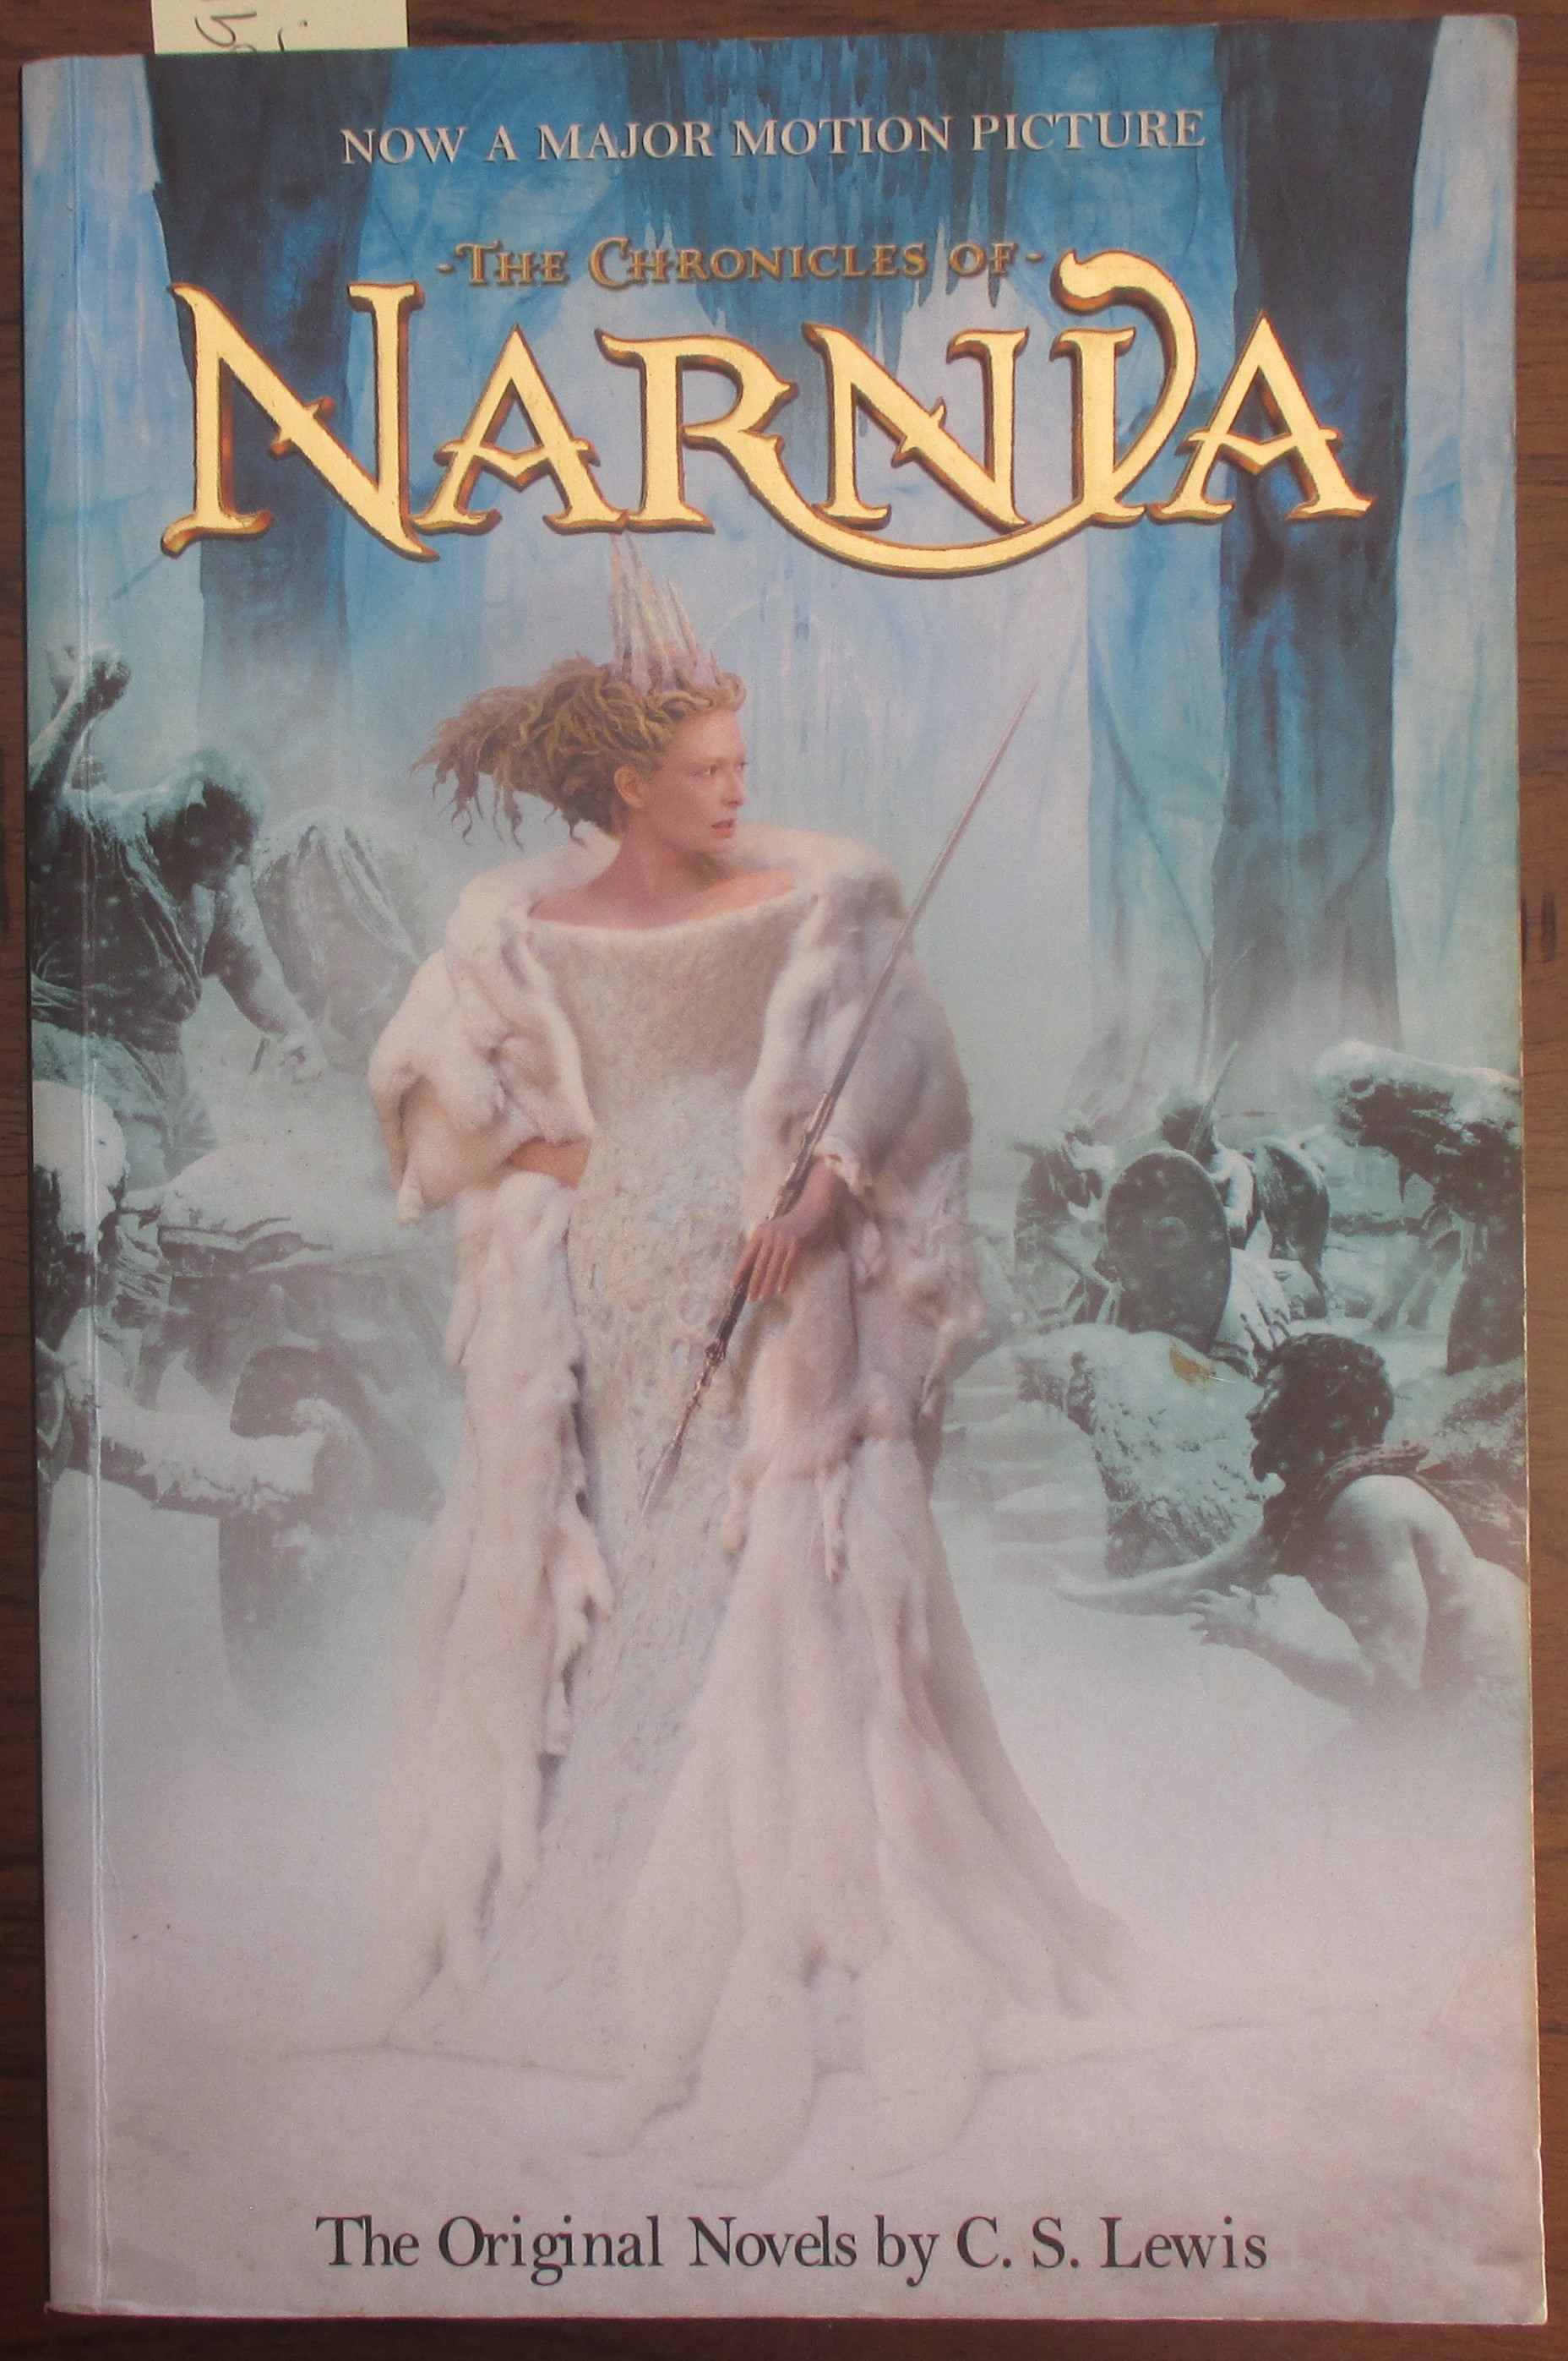 Chronicles of Narnia, The